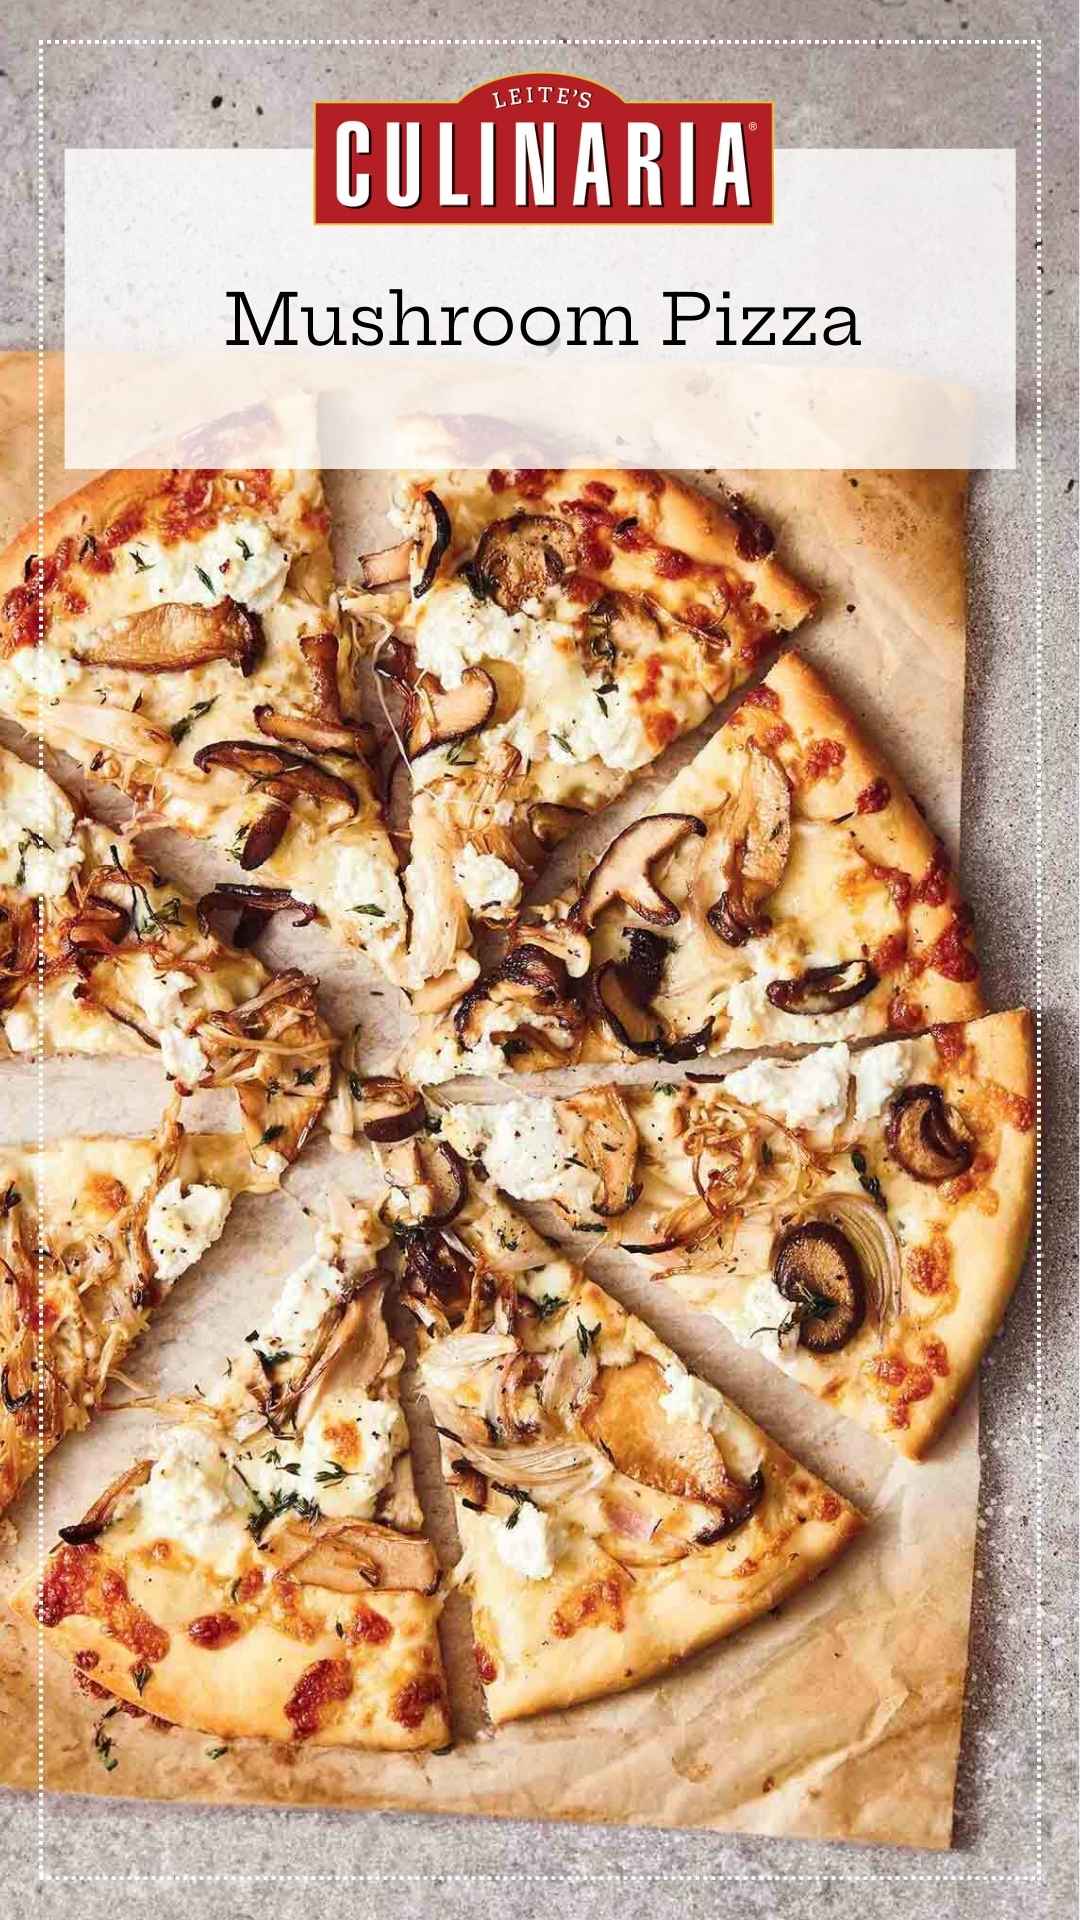 A whole mushroom pizza with ricotta sliced into eight pieces on a sheet of parchment paper.